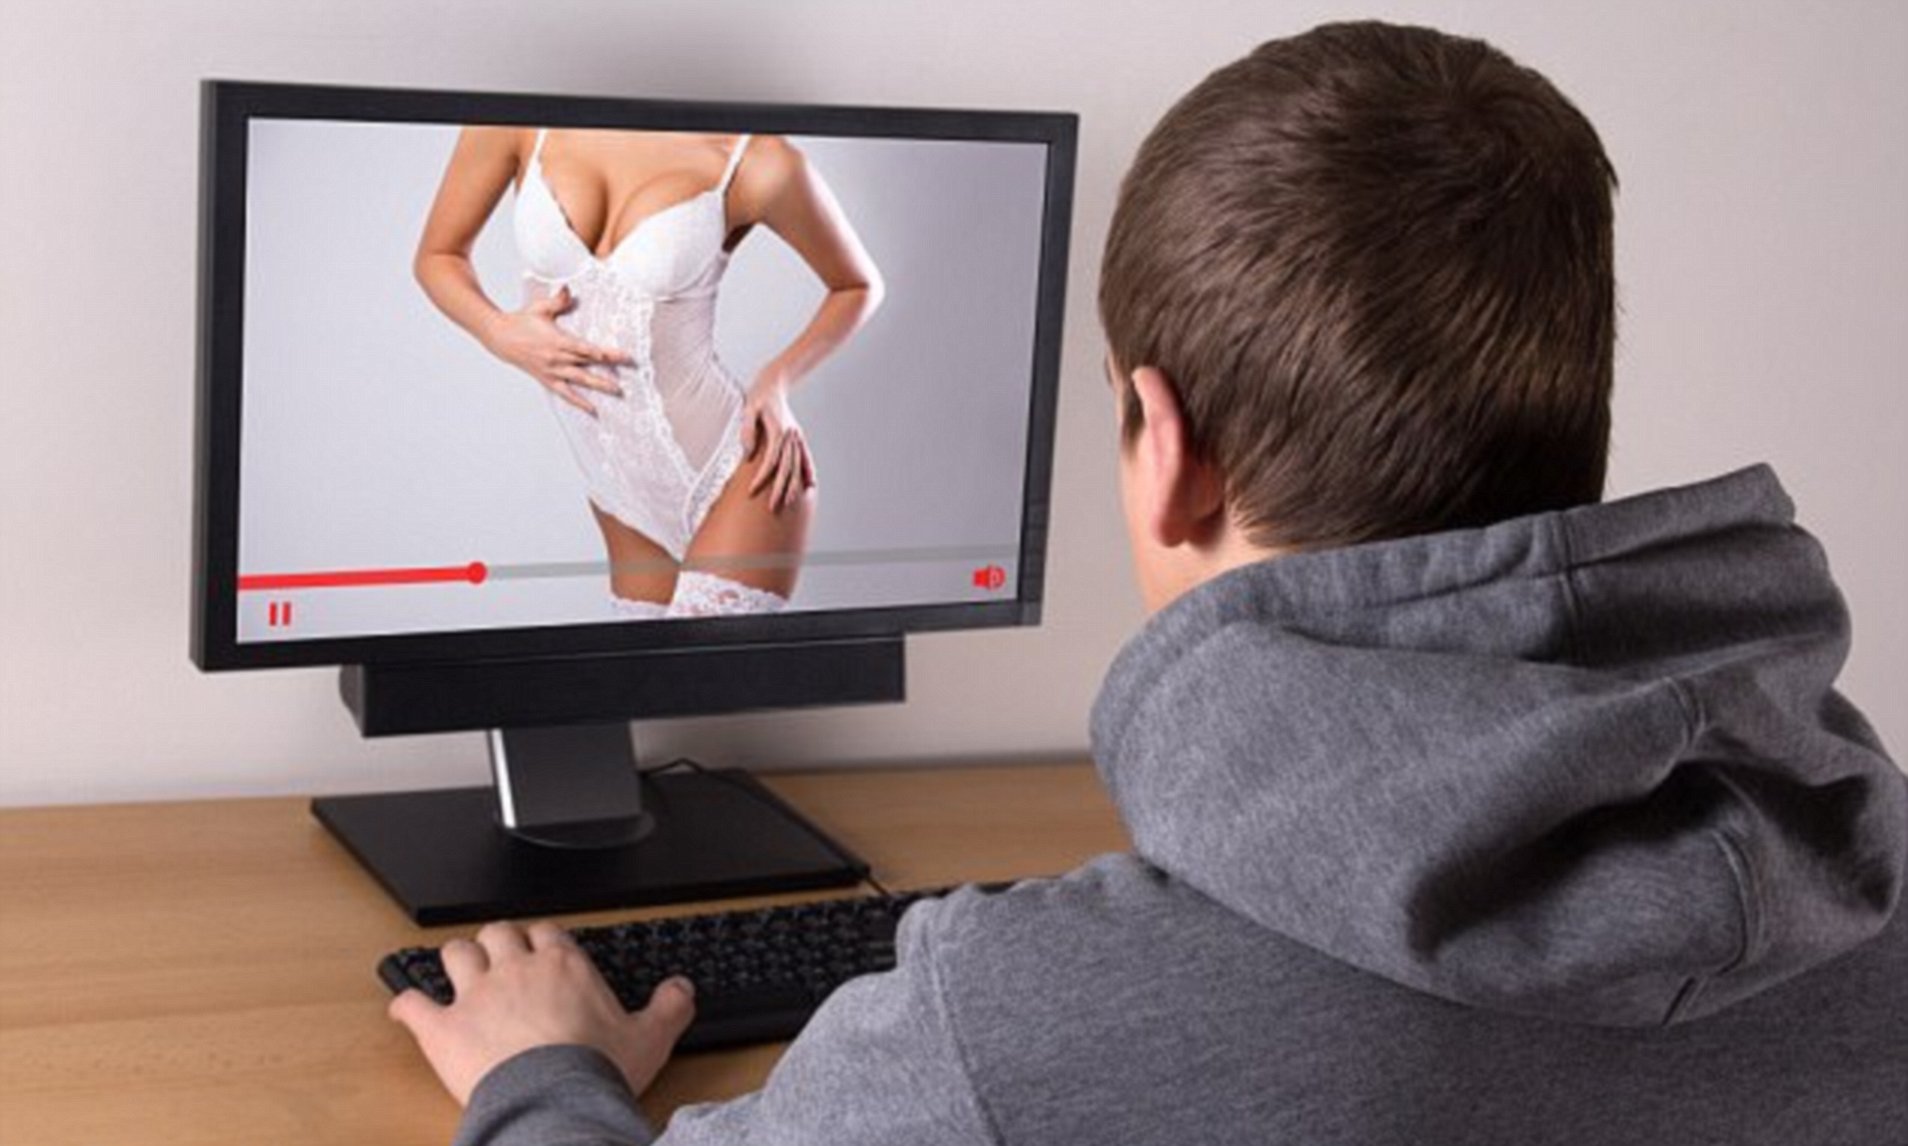 adam filz recommends How To Watch Porn Without Viruses